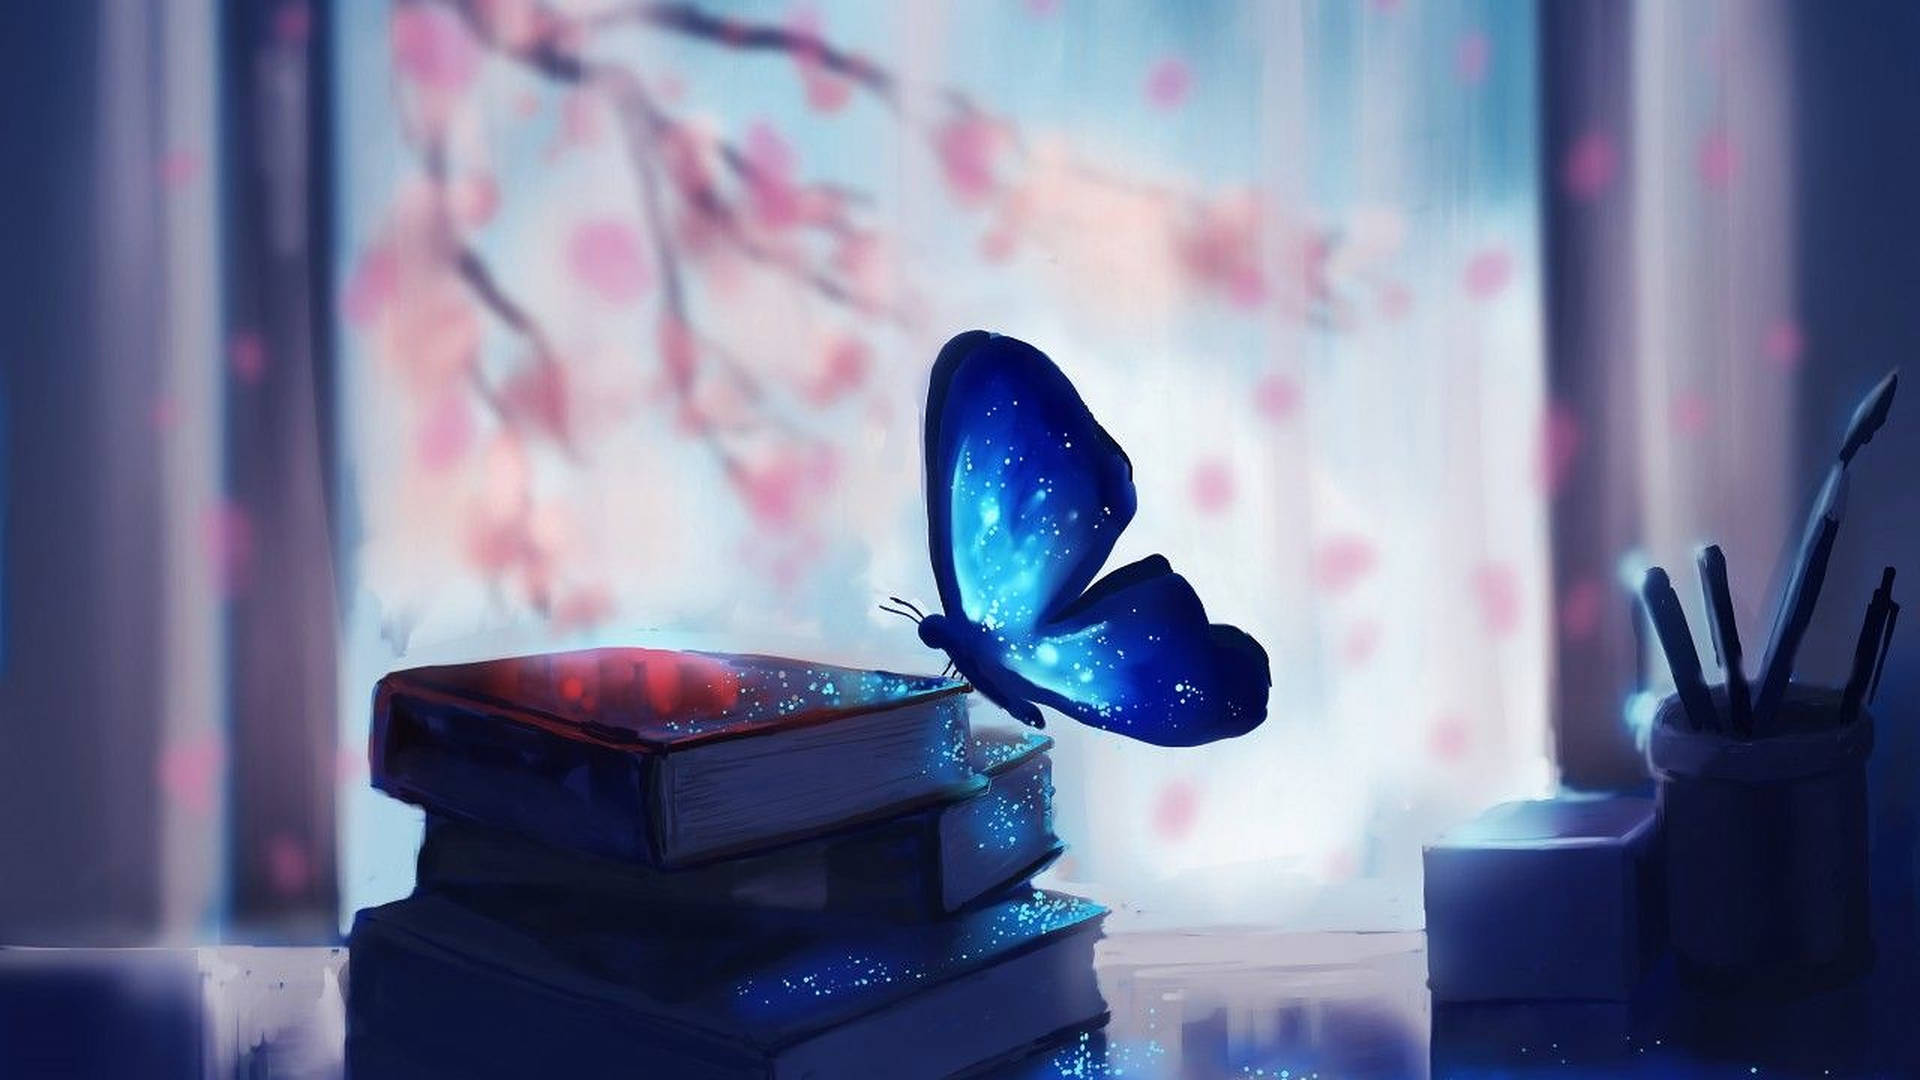 Blue Butterfly Aesthetic On Books